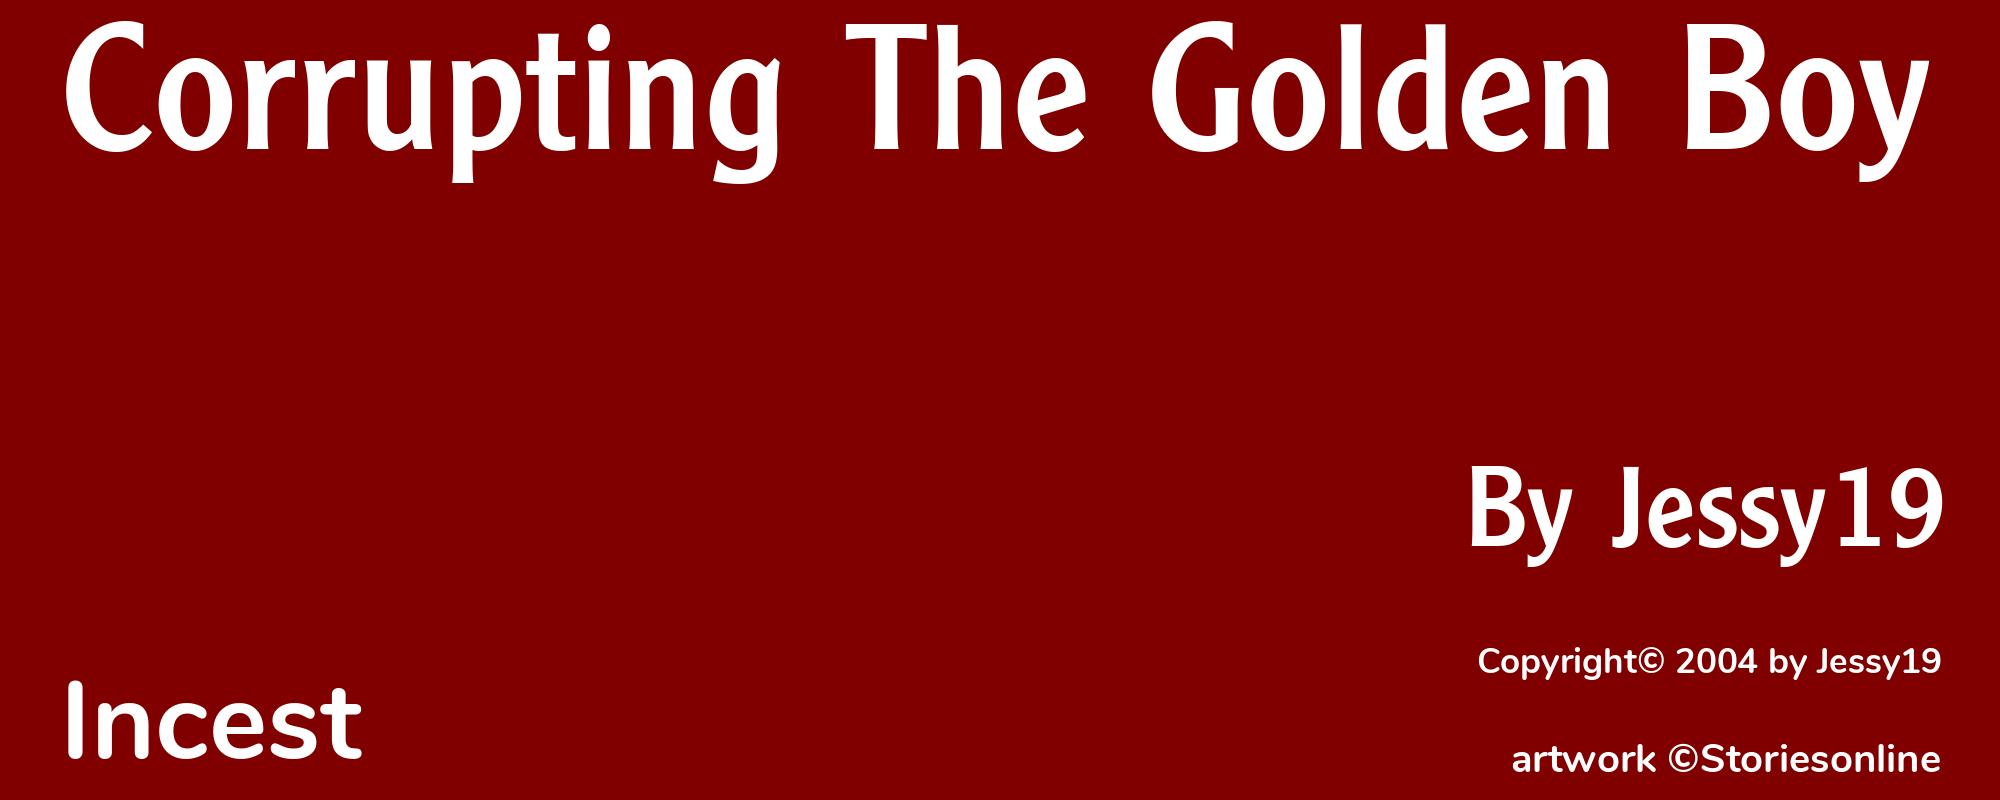 Corrupting The Golden Boy - Cover